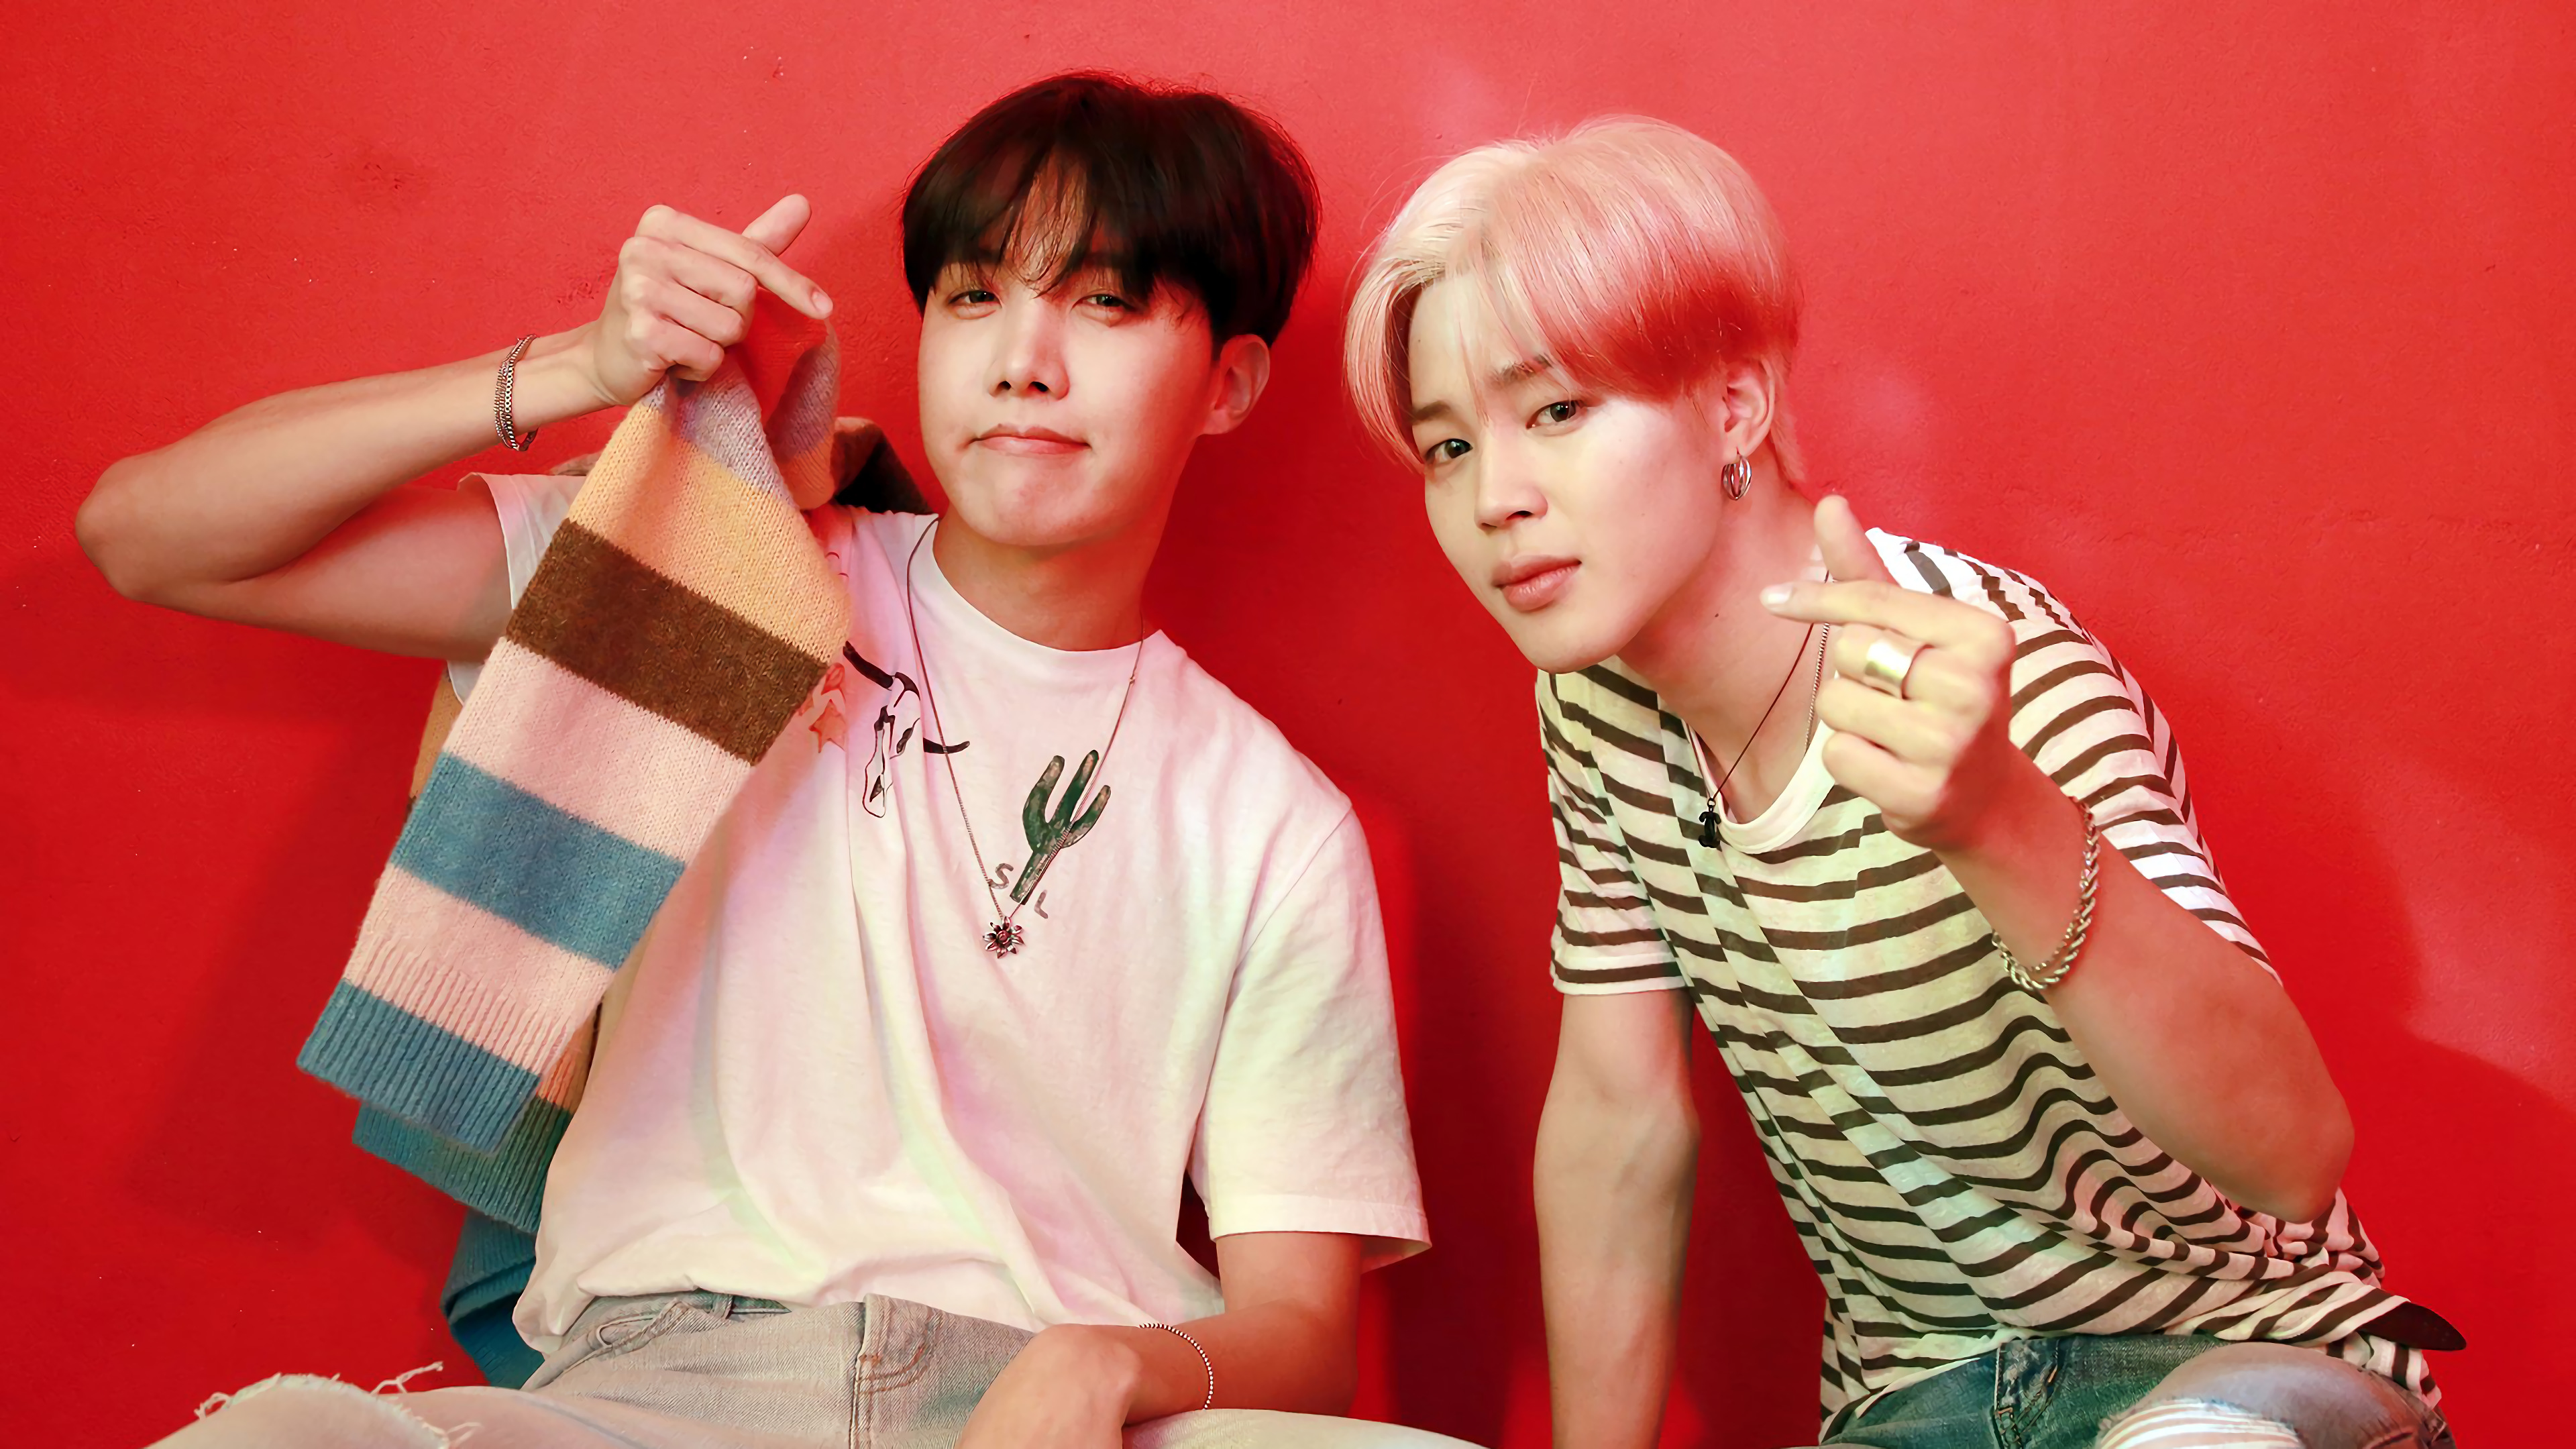 Jimin Ties With Bandmate J-Hope With Another Bestseller